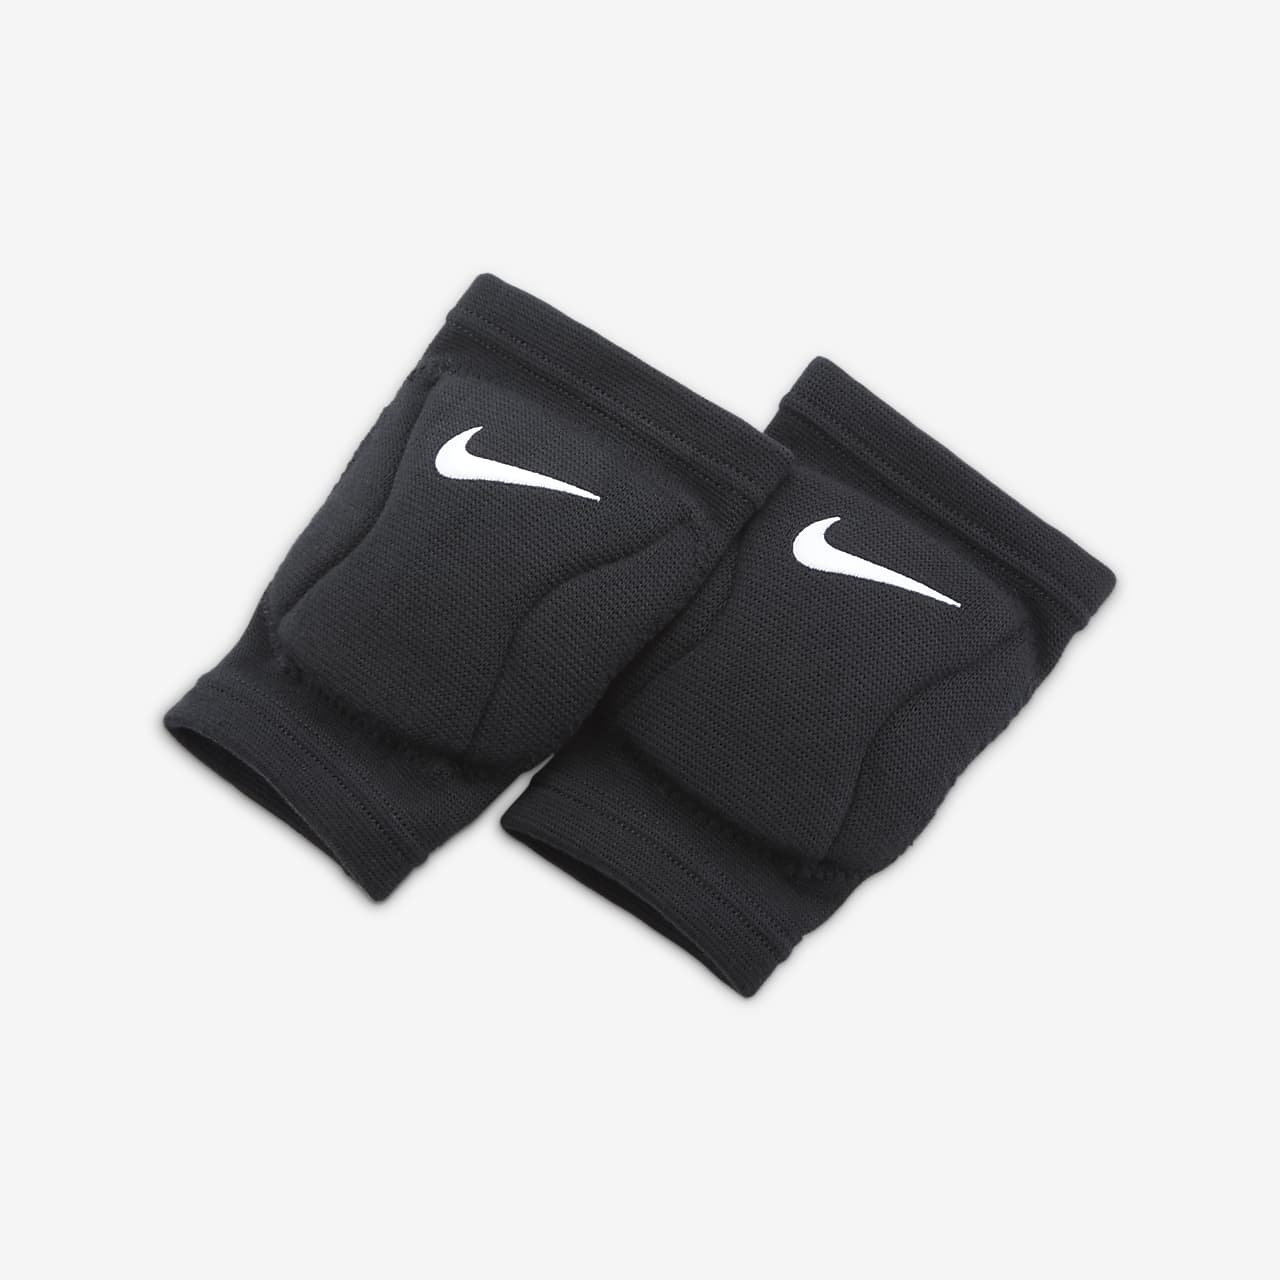 nike volleyball accessories